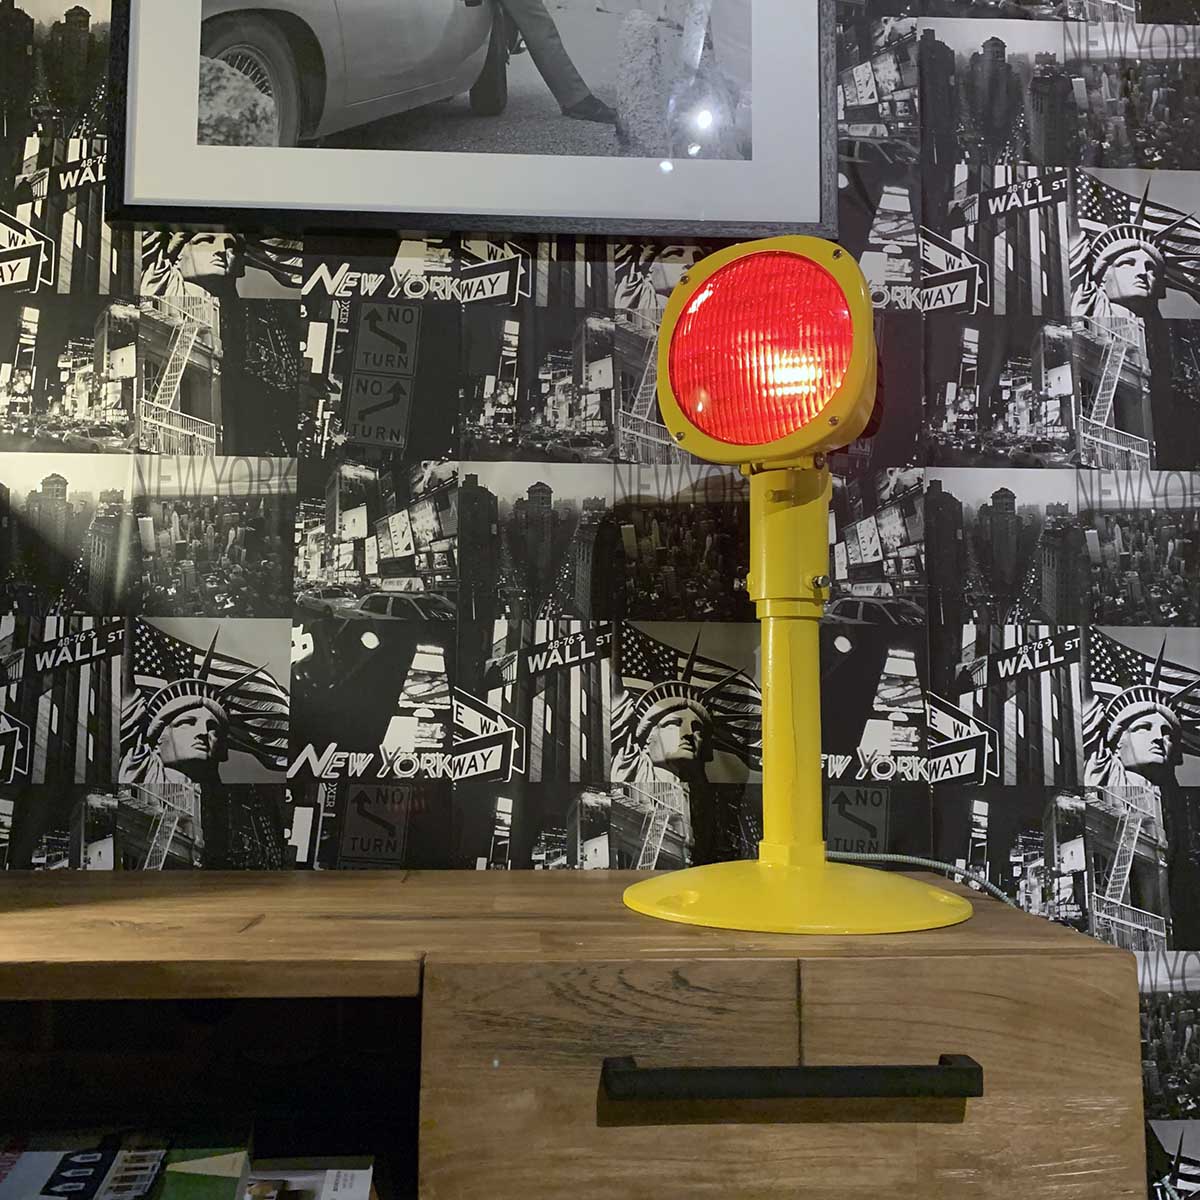 Refurbished Thorn runway approach light in use as a decorative light in a modern interior.